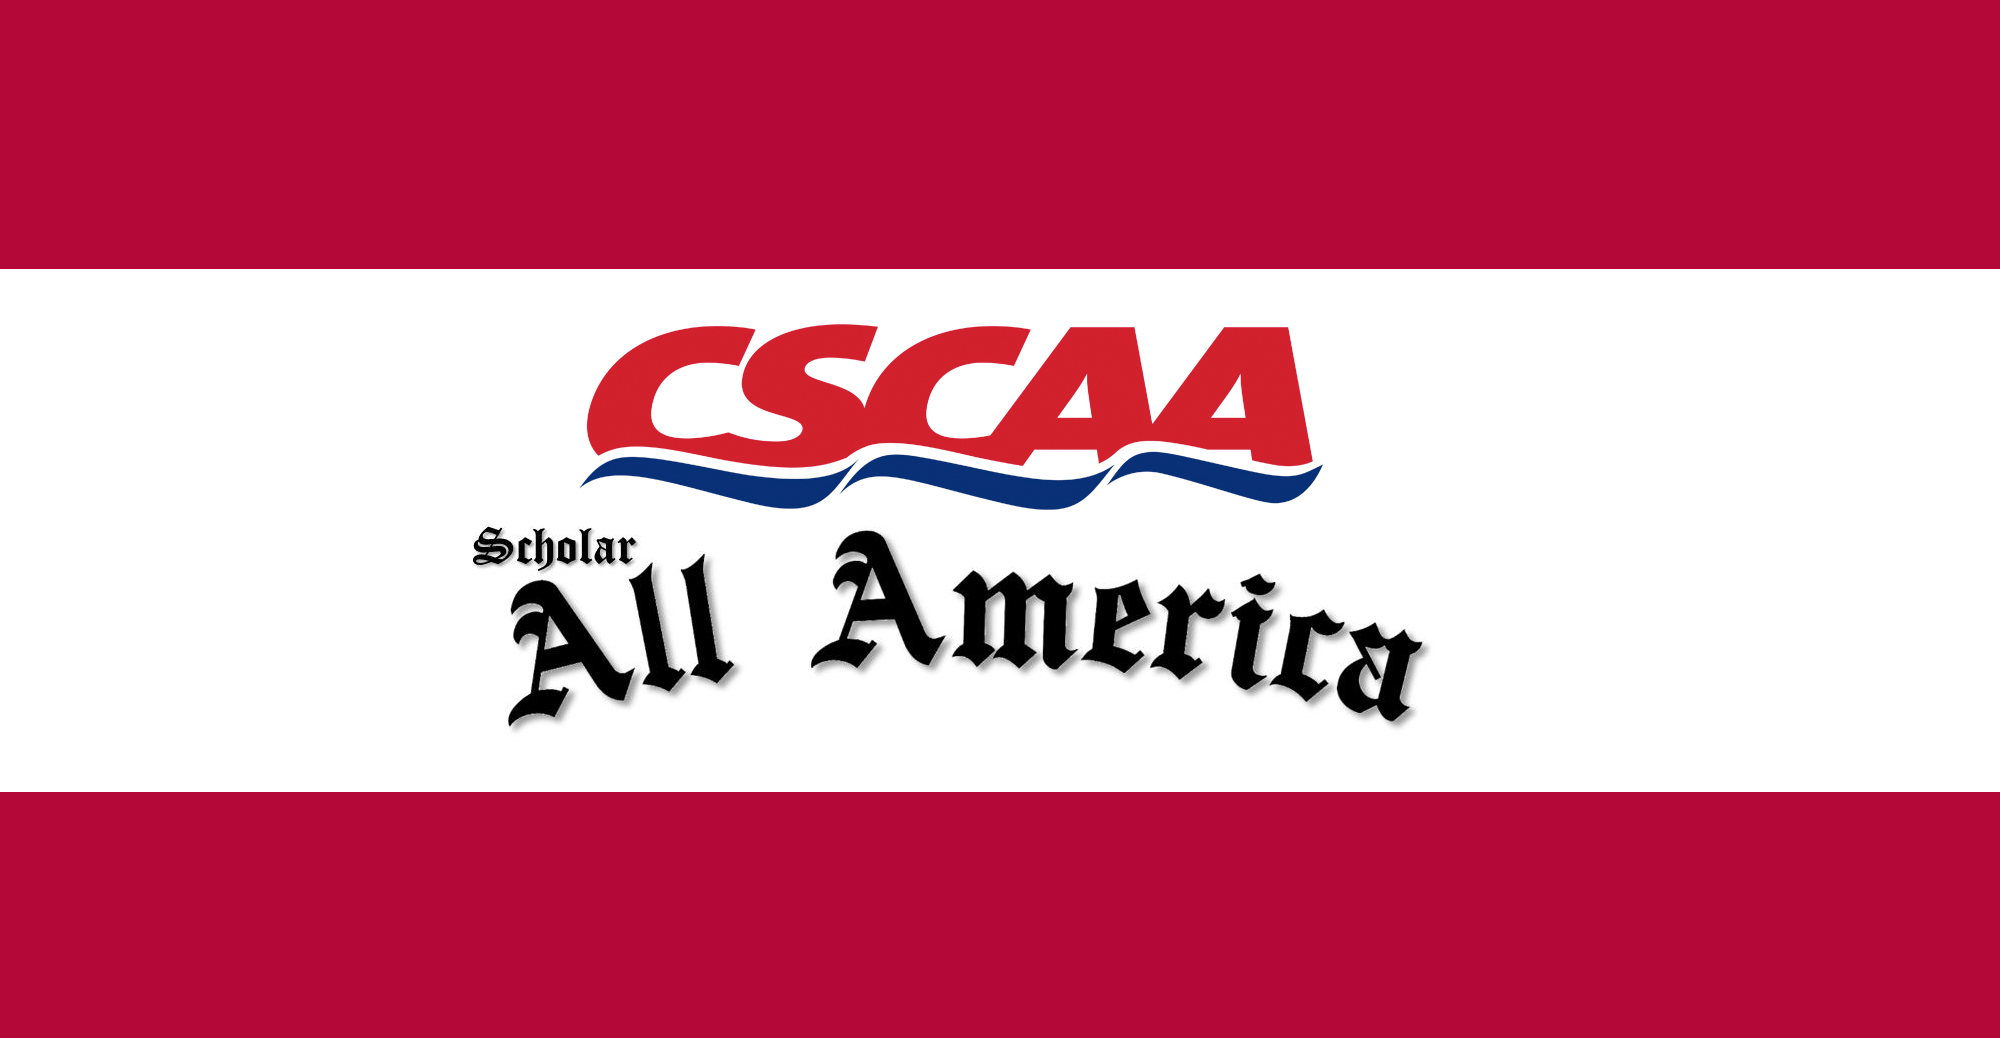 'Roo Men's and Women's Swimming Earn CSCAA Scholar All-America Honors